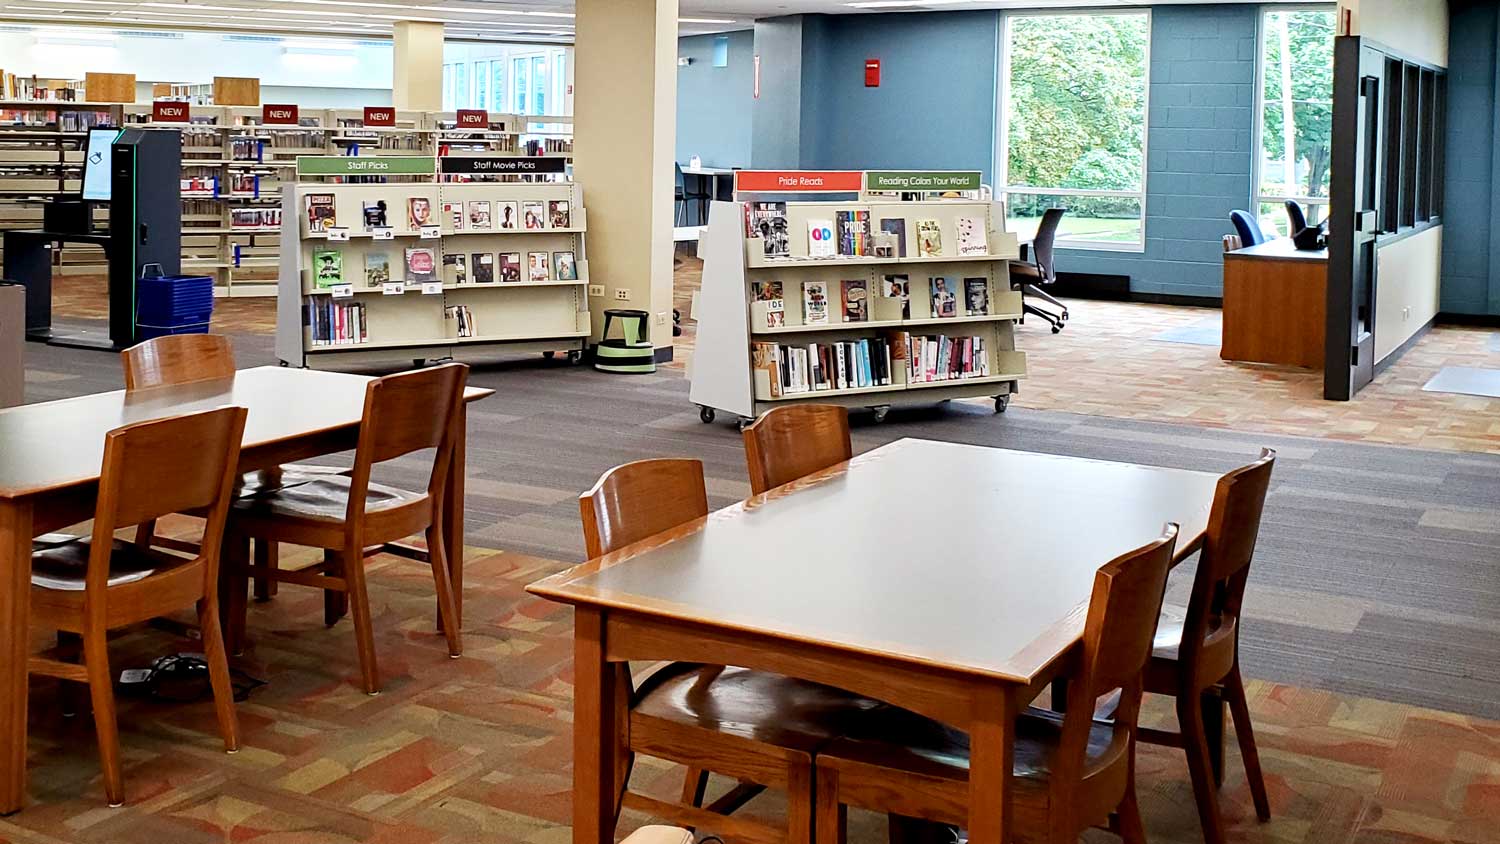 More open space in the main area at the Crystal Lake Public Library.